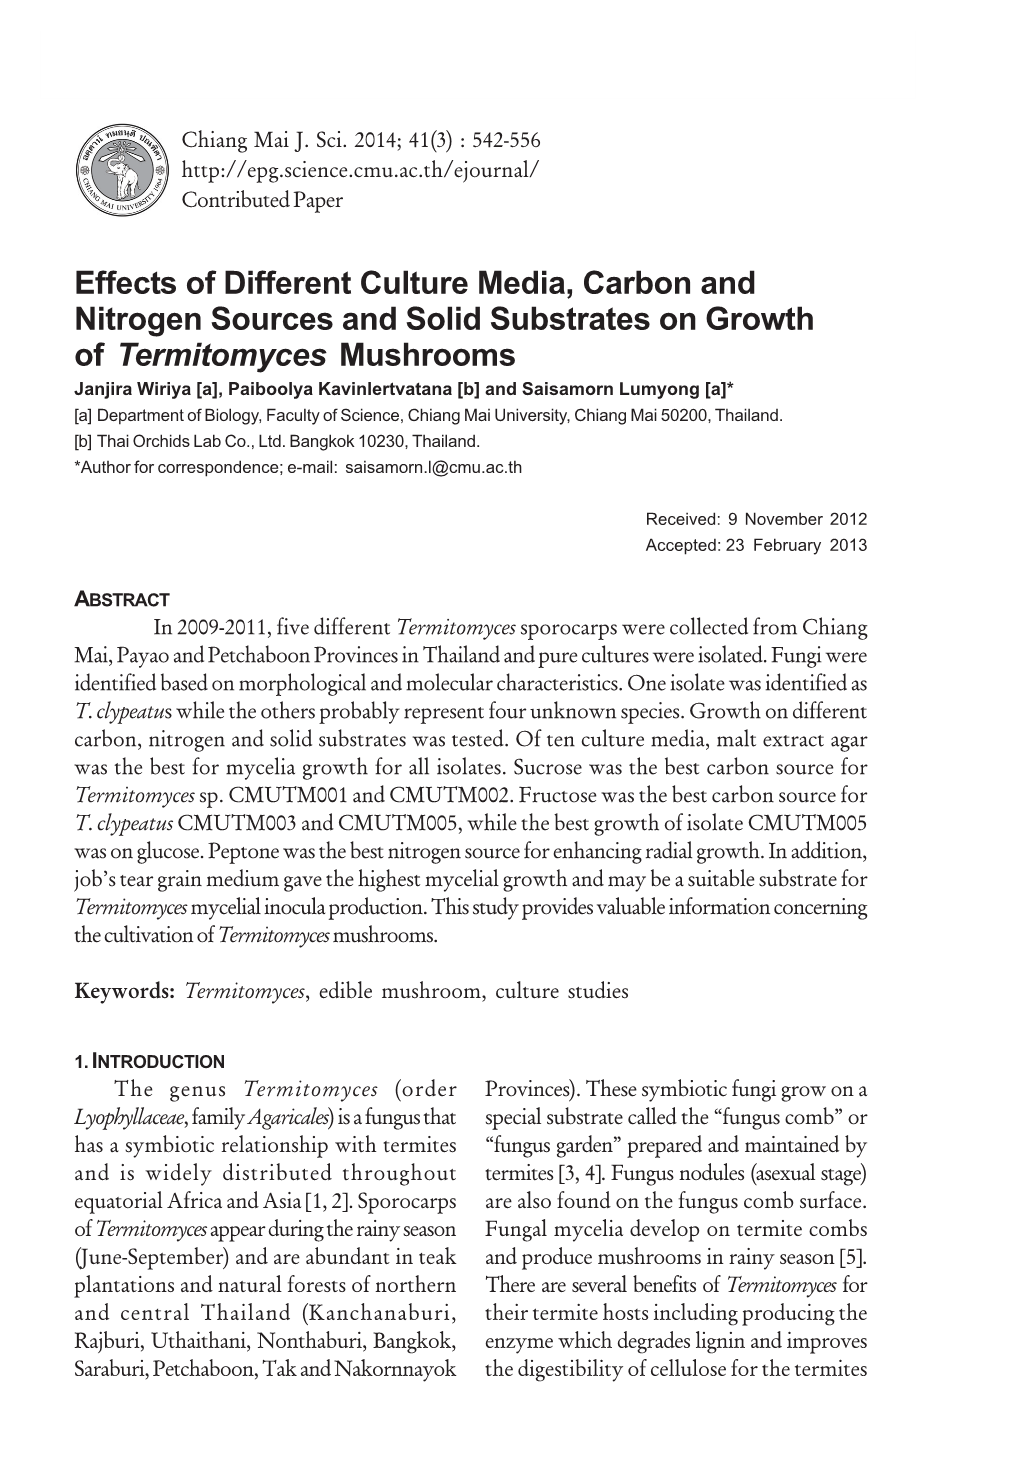 Effects of Different Culture Media, Carbon and Nitrogen Sources And